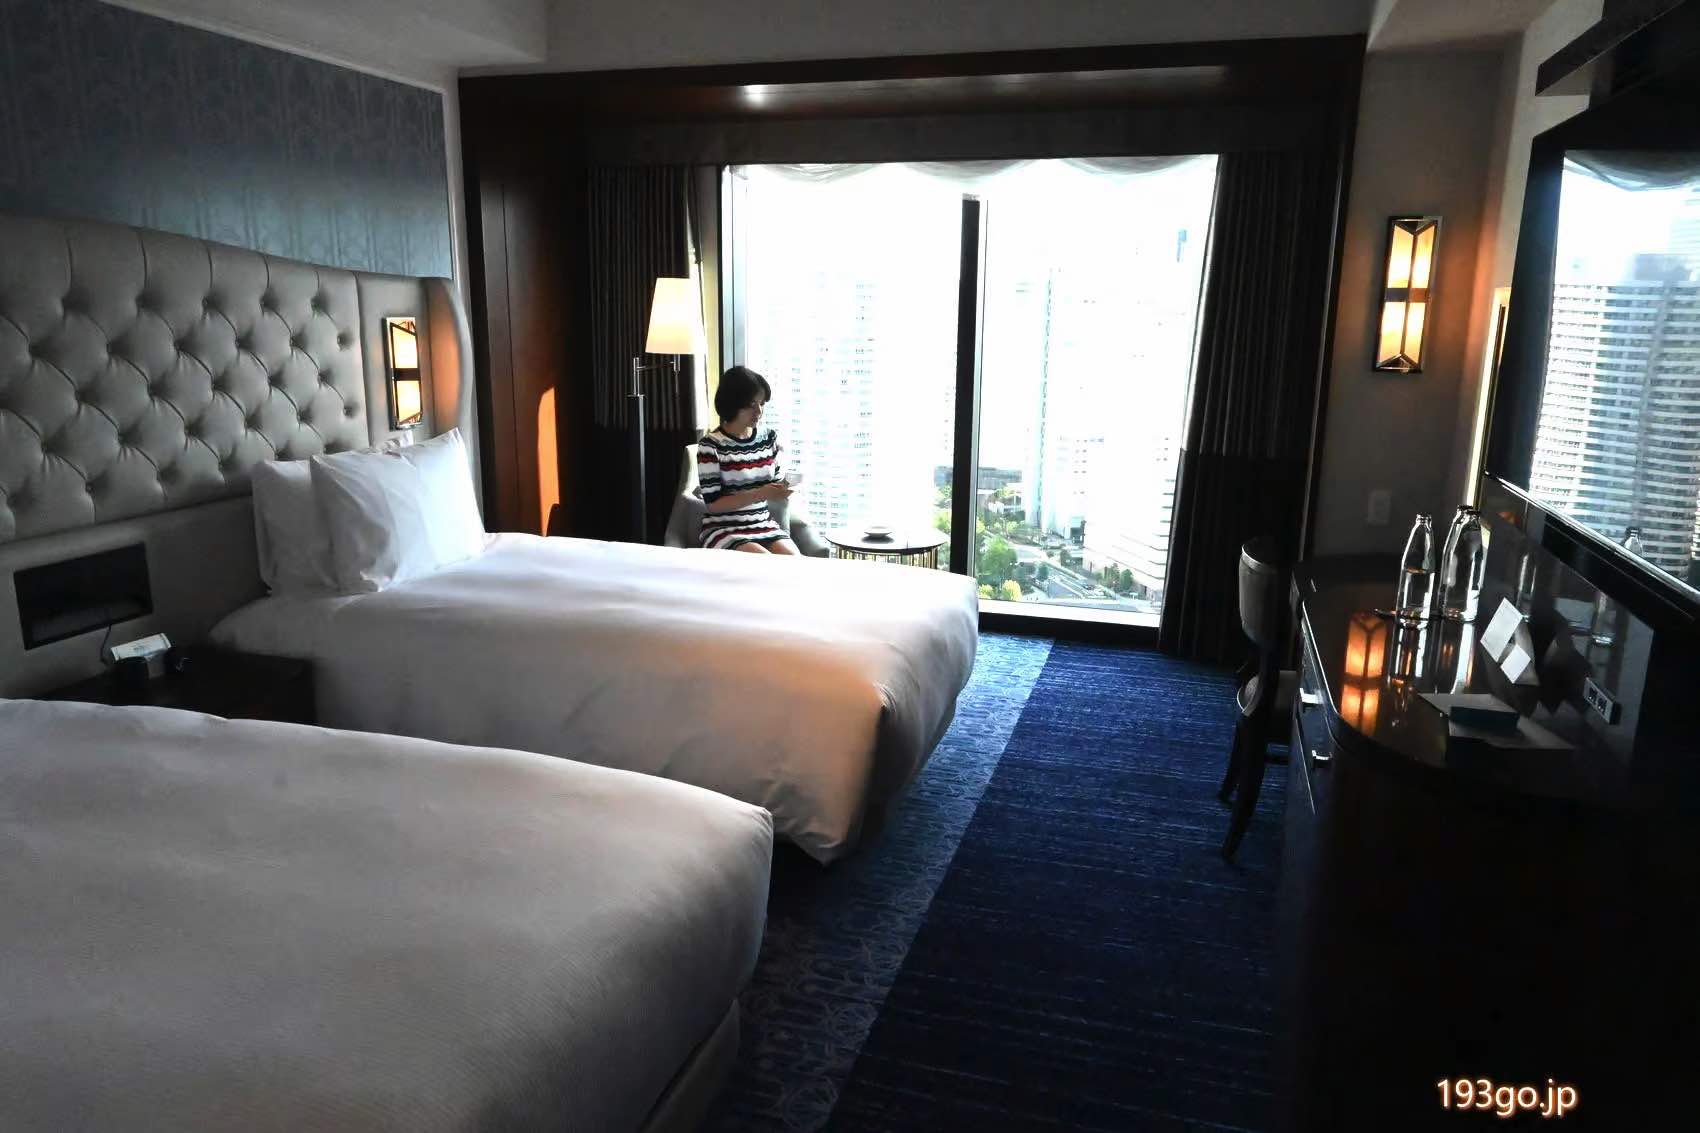 Hotel Review : Stay in an executive room on the top floor of the Hilton Yokohama! Spacious room, what's the view? Check out the amenities!